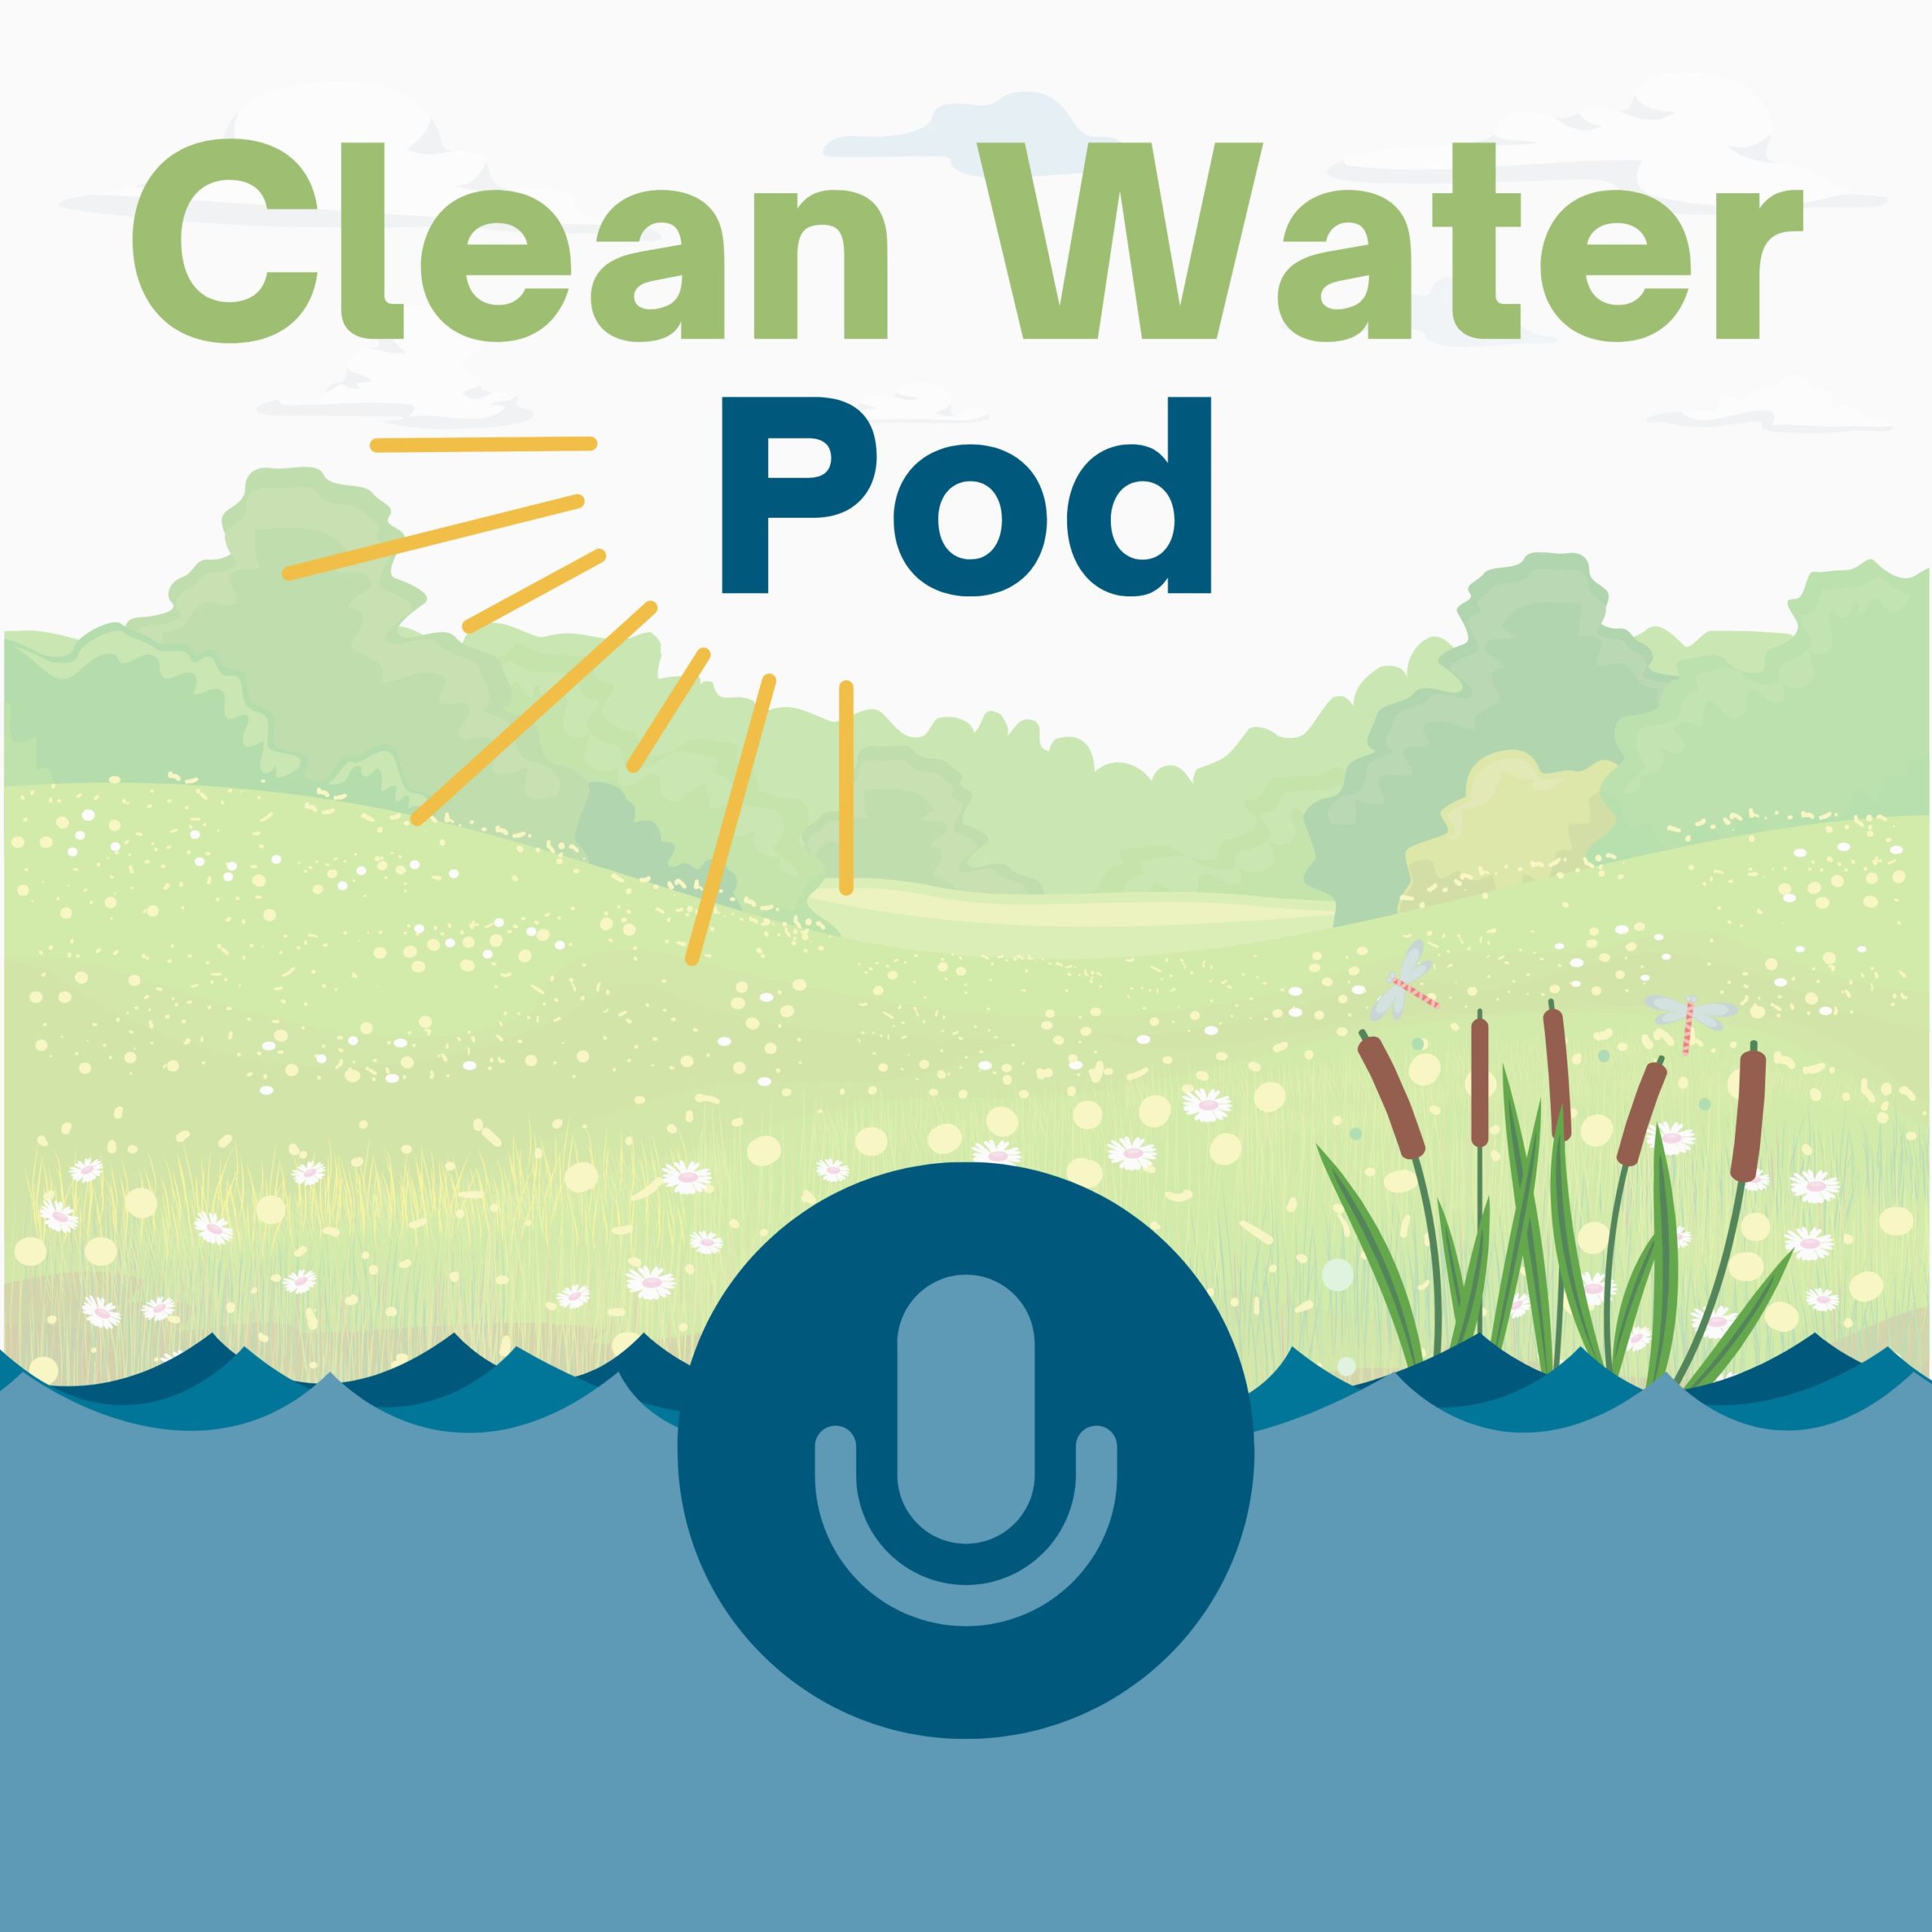 Clean Water Pod podcast graphic